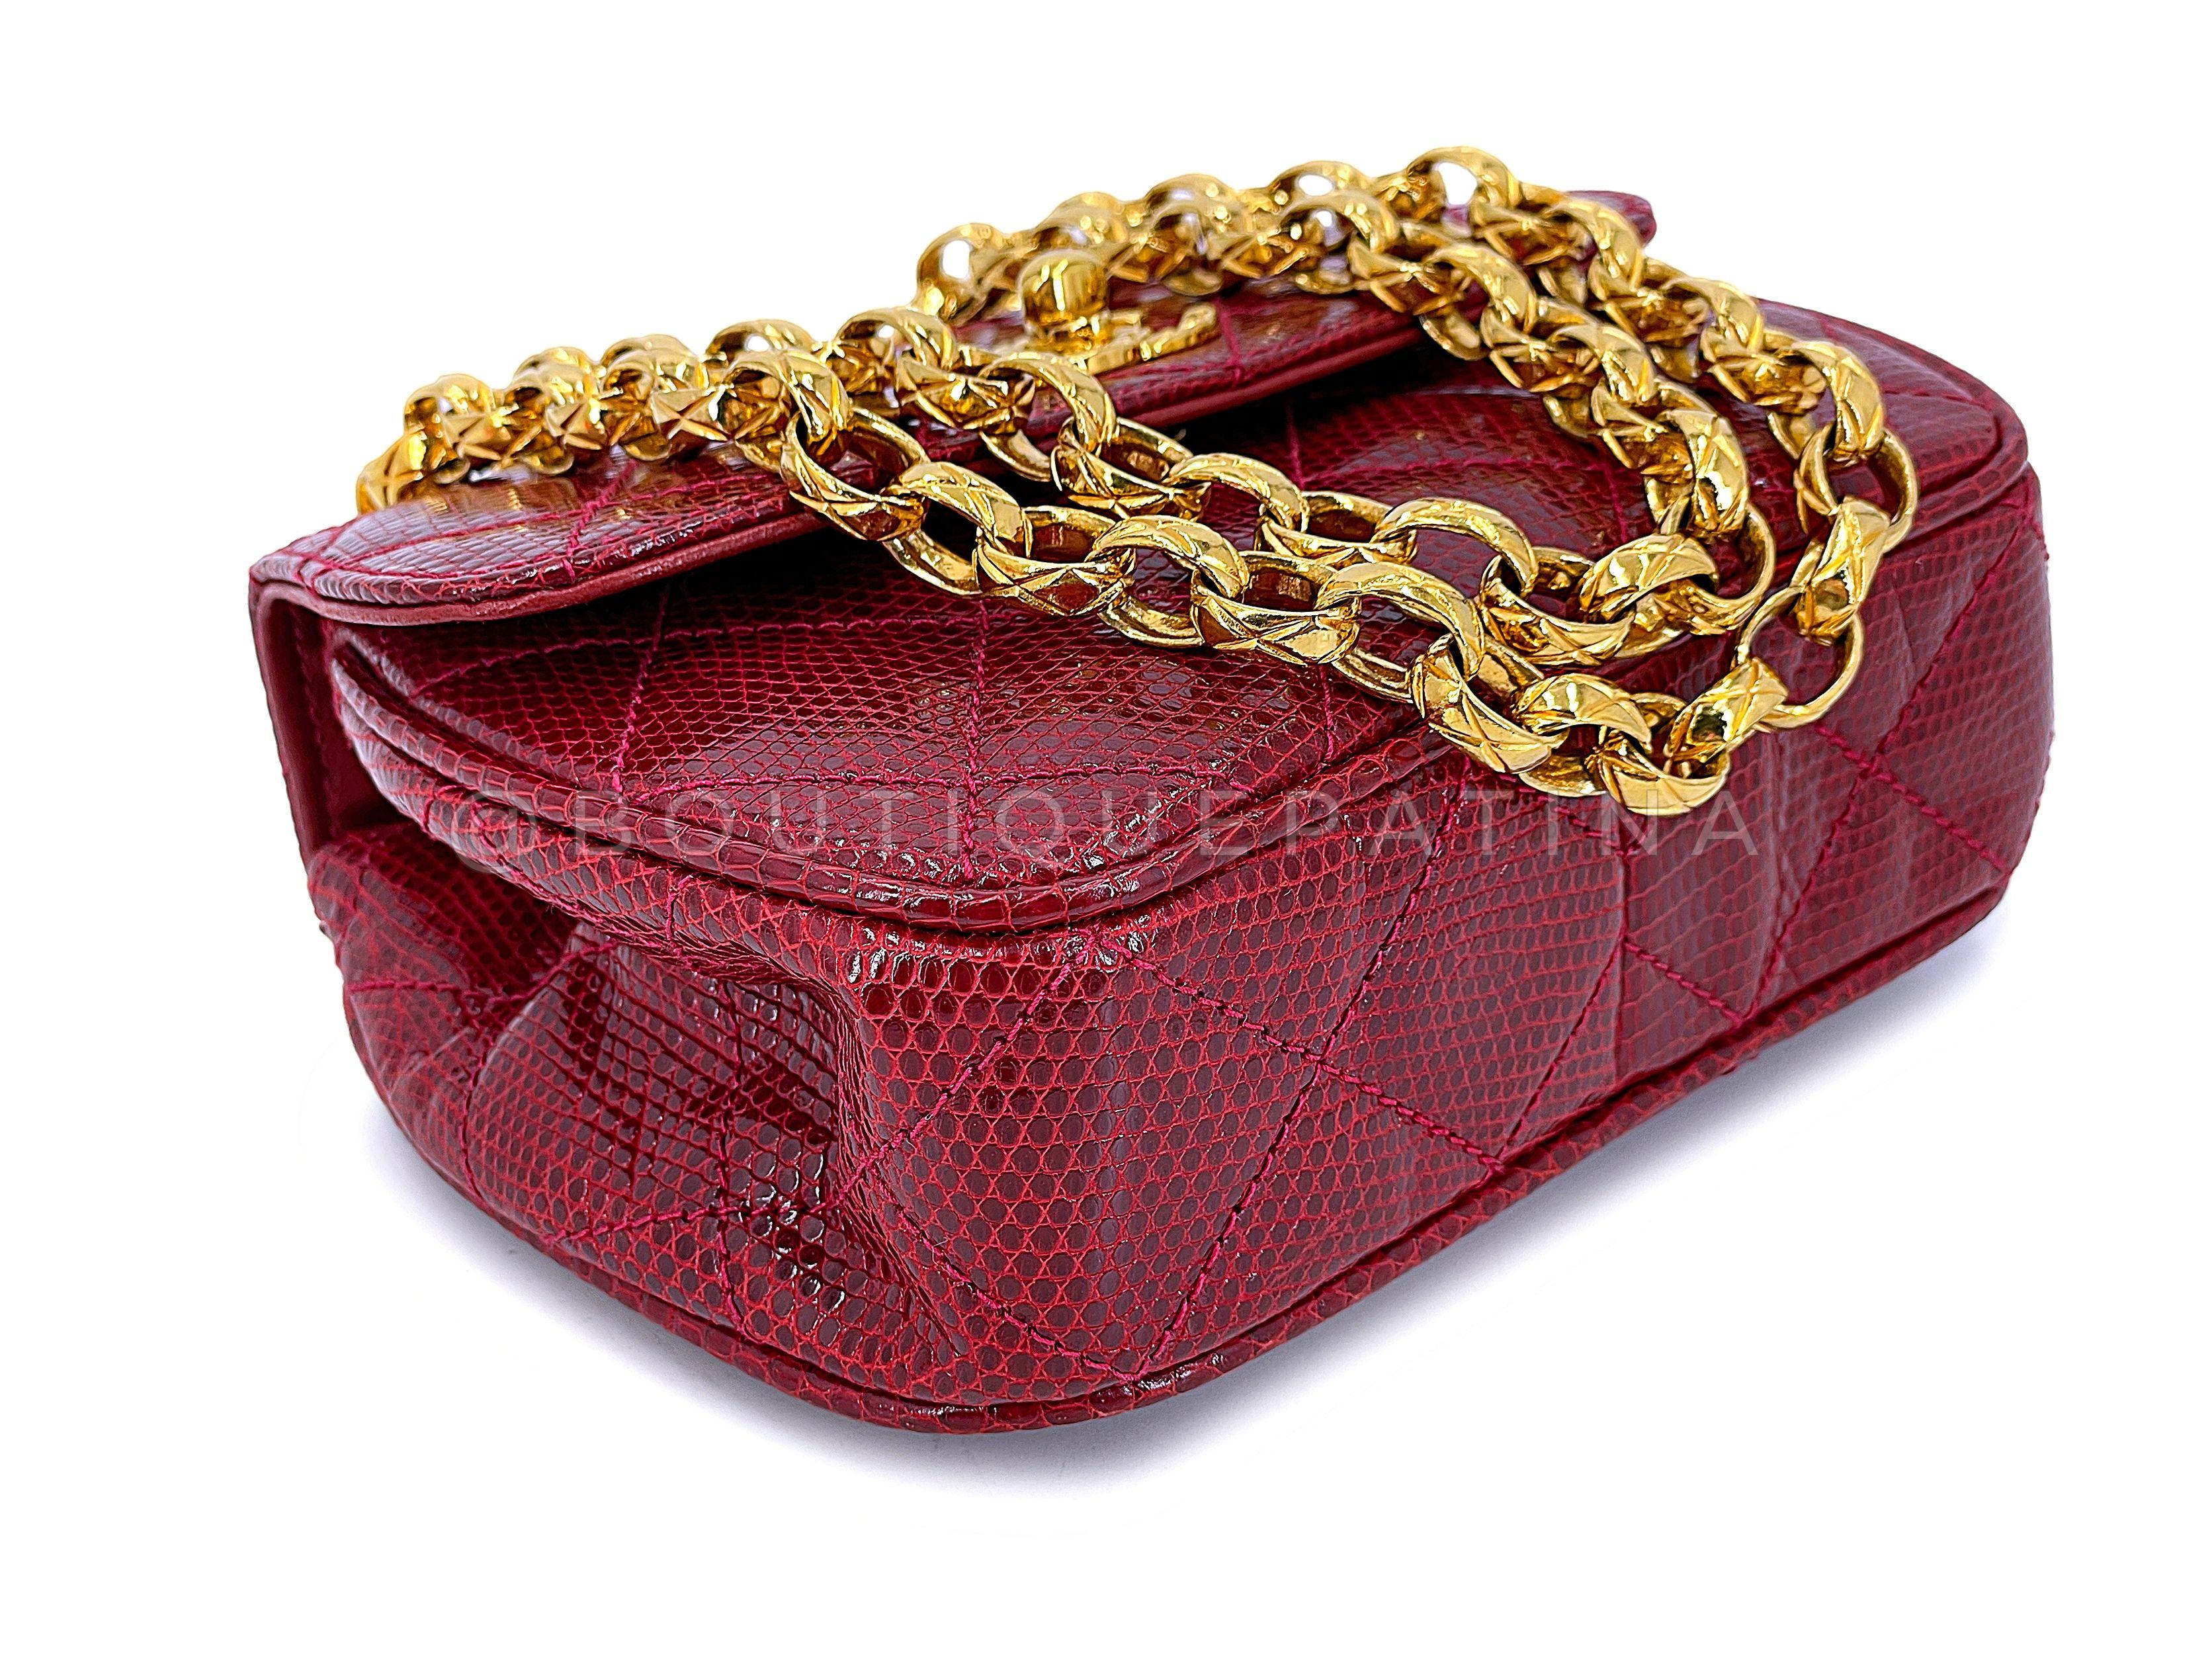 Rare Chanel 1980s Vintage Red Lizard Etched Chain Round Mini Flap Bag 67290 For Sale 3